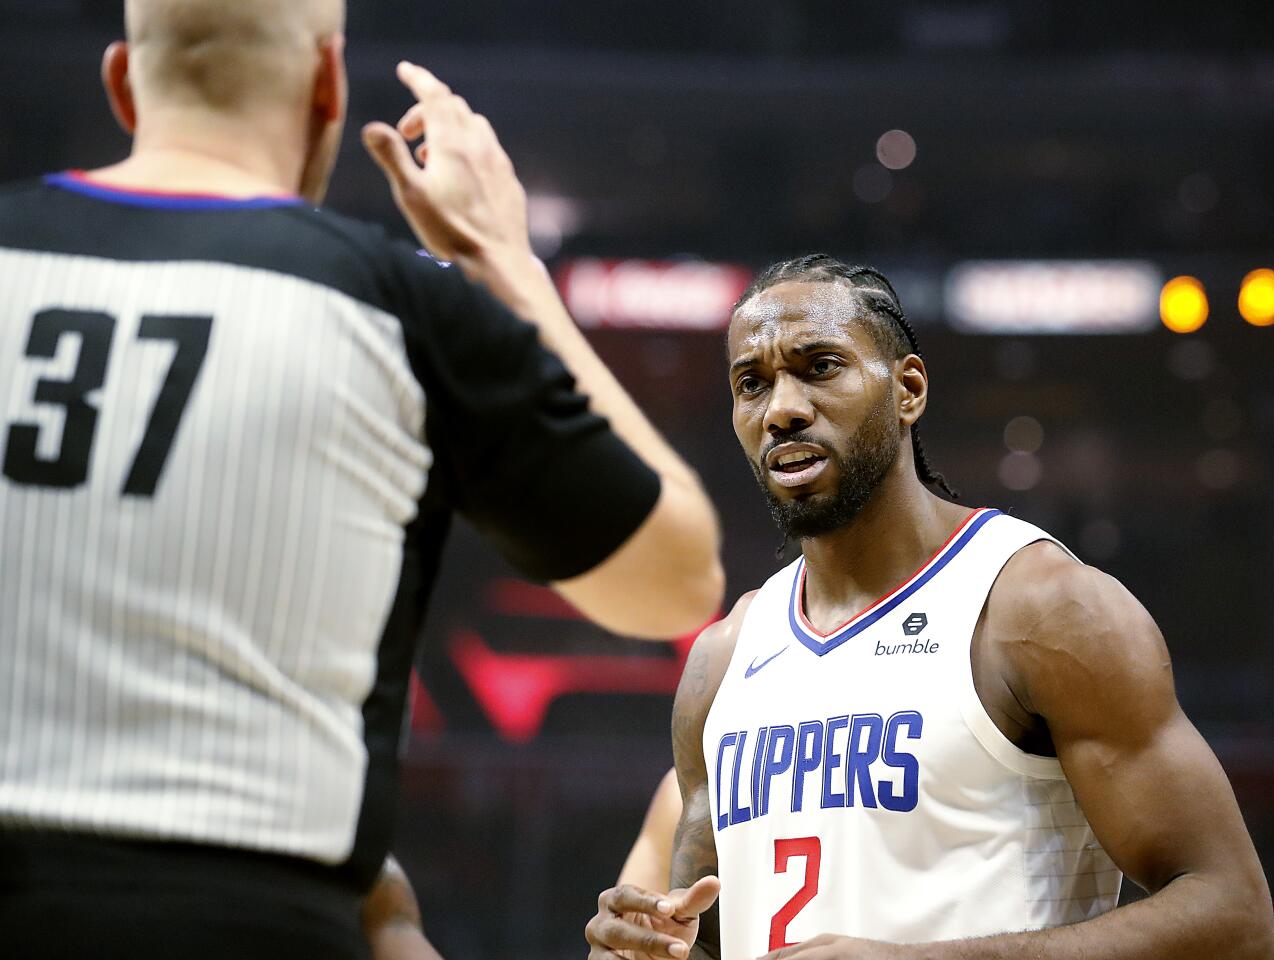 Clippers forward Kawhi Leonard reacts after getting called for an offensive foul against the Celtics during the second quarter of a game Nov. 20 at Staples Center.